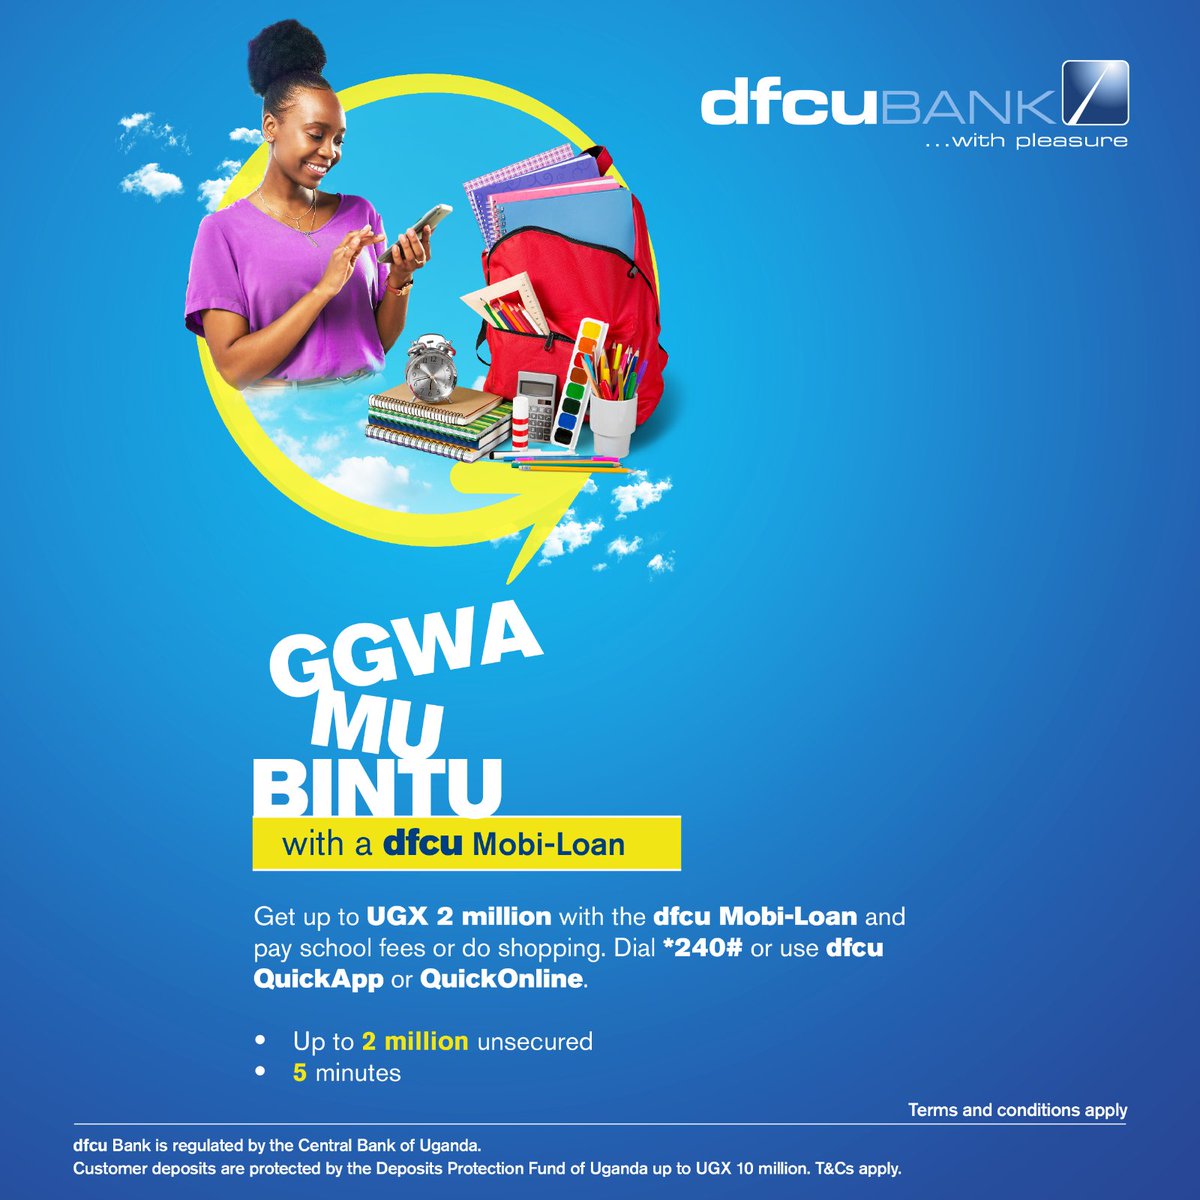 #AD
Gwa Mu Bintu ne @dfcugroup and get up to Ugx 2 million with #dfcuMobiLoans to pay school fees or shopping.😇🎉

📱It's simple, dial *240# or use dfcu QuickApp or Quick Online in just 5 mins.
Visit dfcugroup.com/promotions/ to apply.
#GgwaMuBintu #TransformingLivesAndBusinesses